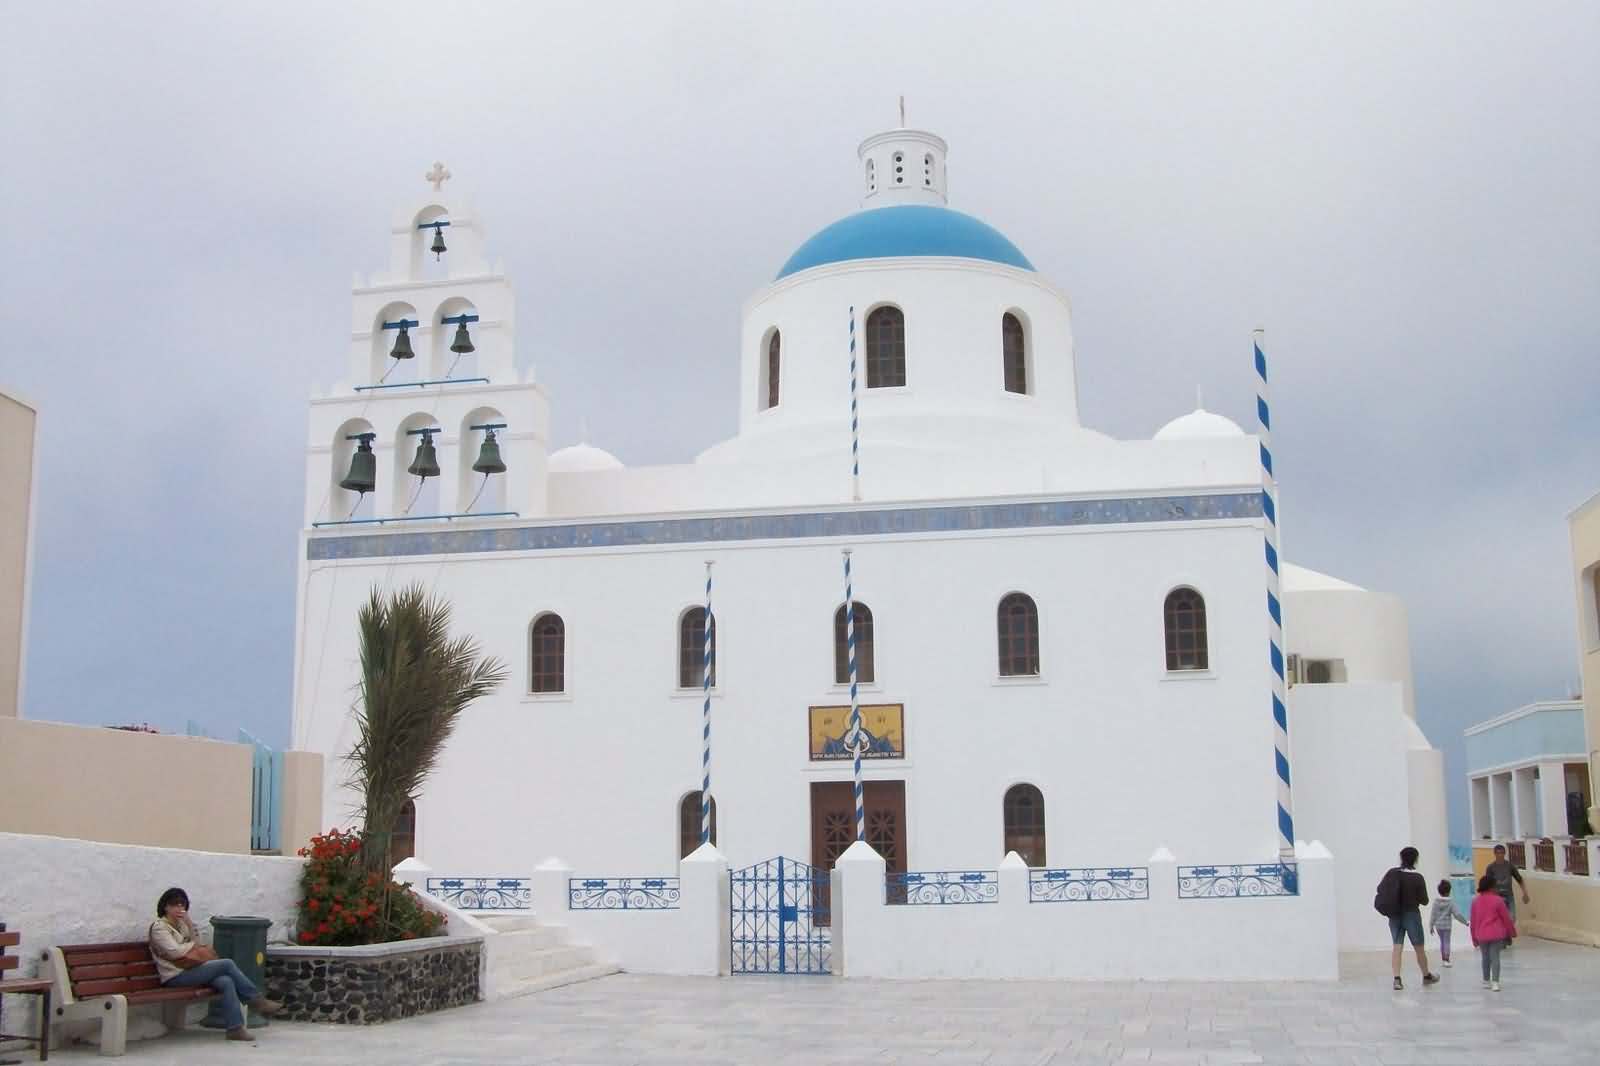 Front View Of The Blue Dome Church